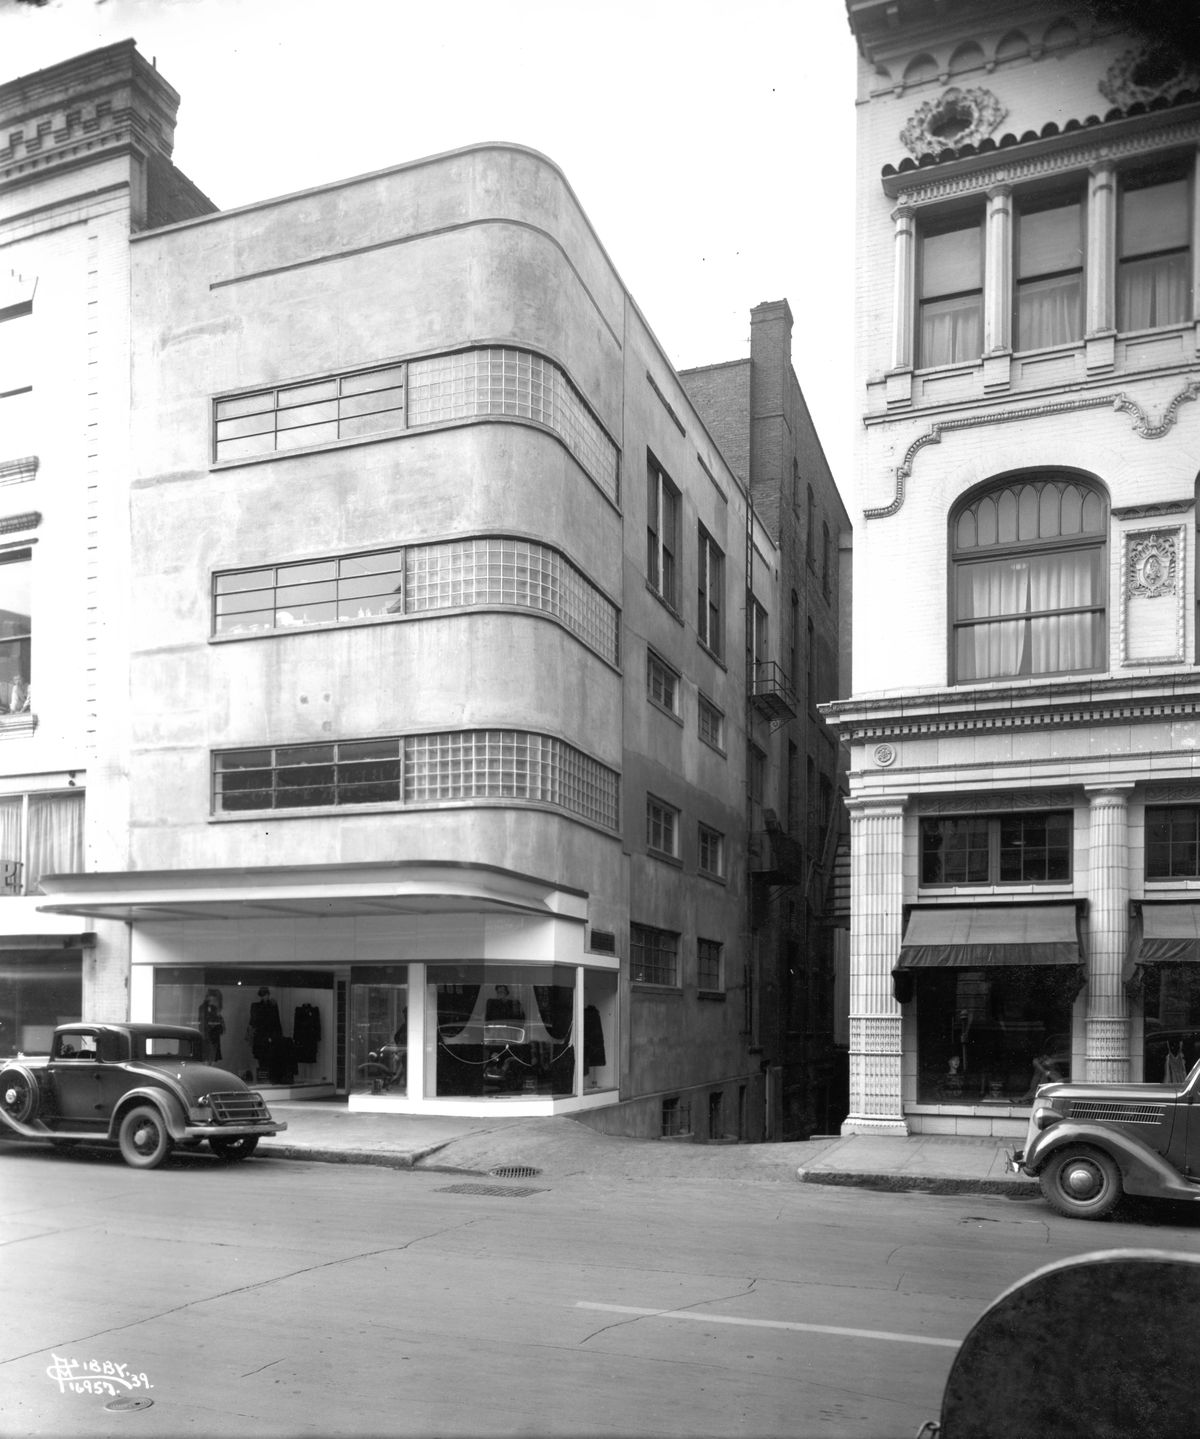 1939: On Wall Street in downtown Spokane, on the left of the alley is the narrow Cannon bank building and on the right is the Crescent department store. After A.M. Cannon’s bank failed in 1893, Washington Trust Bank was started there in 1902 and today is the oldest and largest privately held bank in the Northwest. The building was torn down in 1953 to expand the Crescent. (Charles Libby photo, courtesy of Dan Murphy / SR)